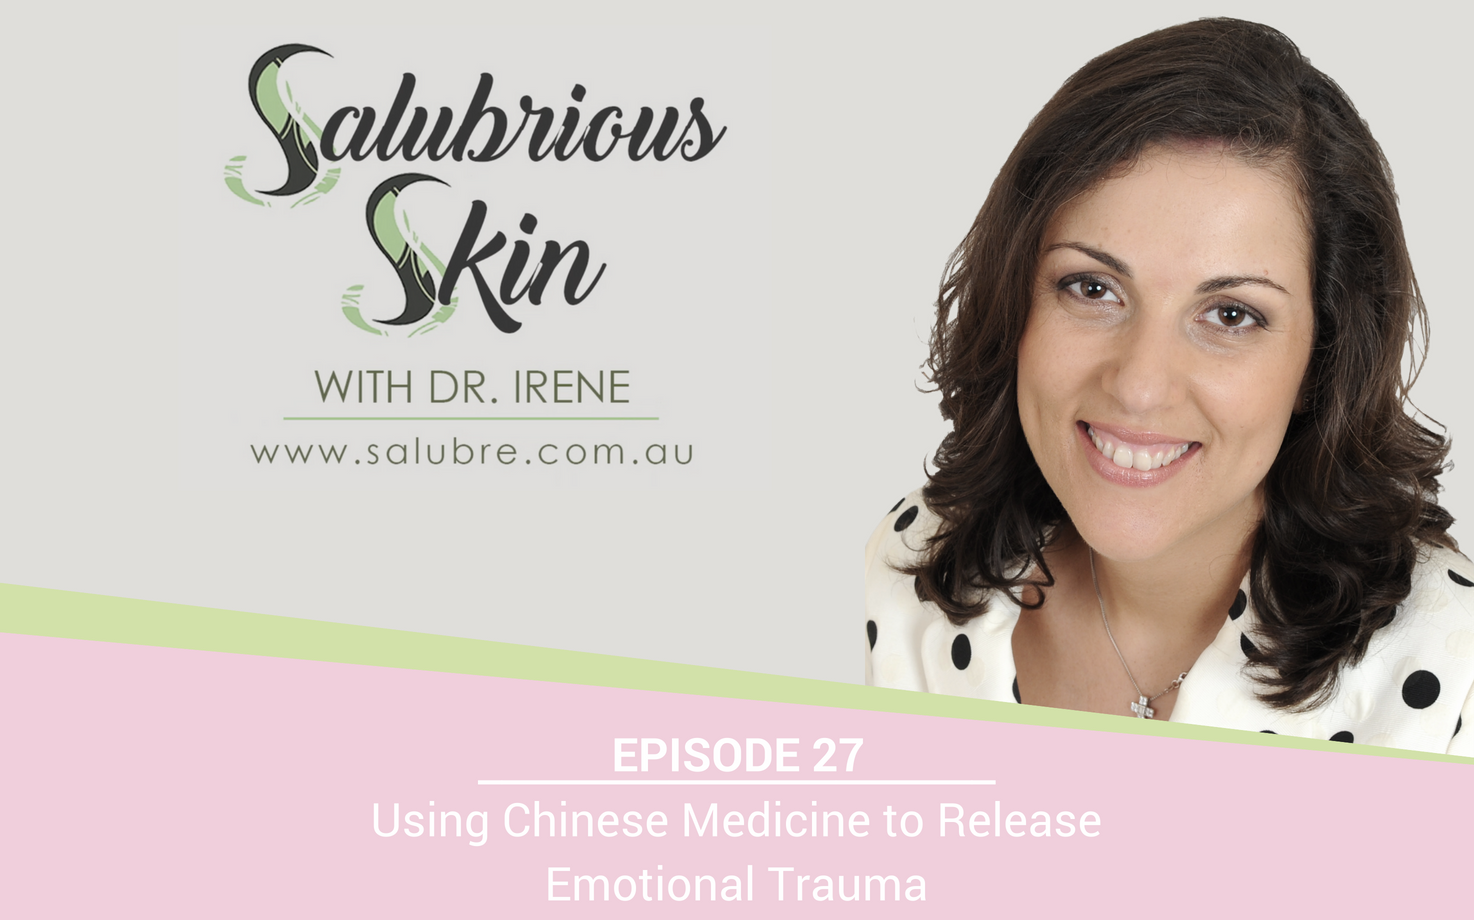 Episode 27: Using Chinese Medicine to Release Emotional Trauma